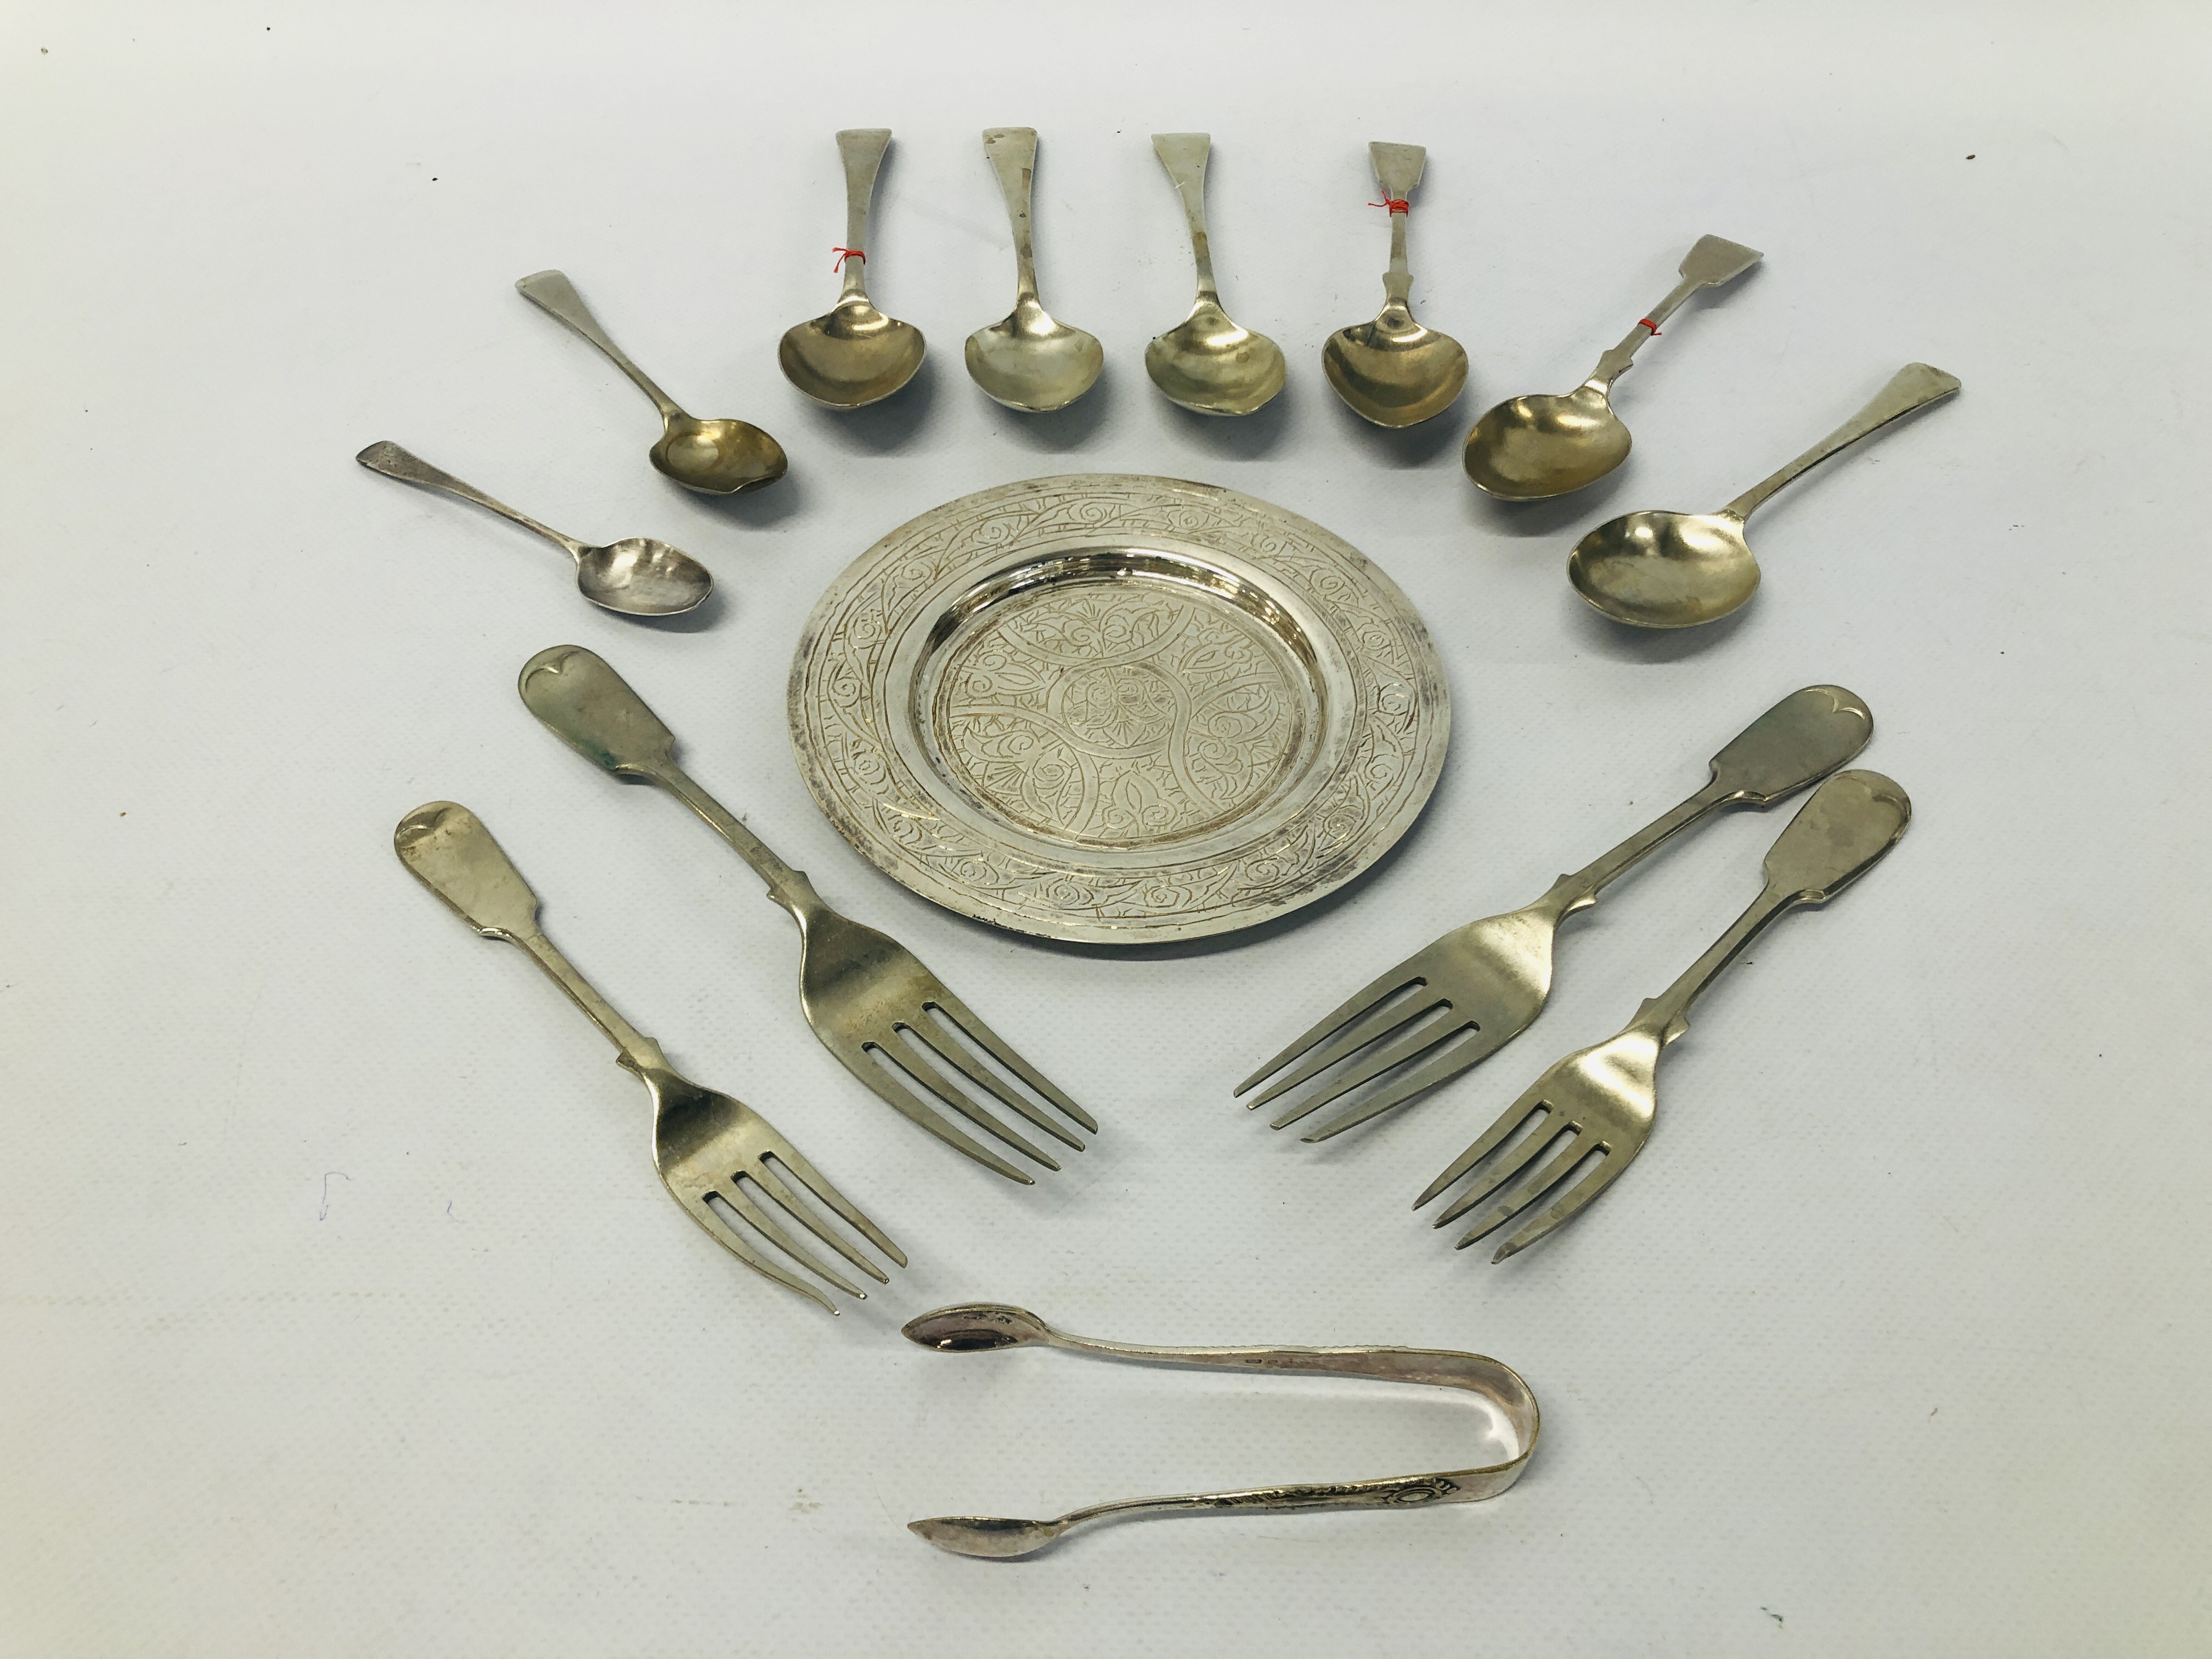 SMALL CONTINENTAL SILVER DISH ALONG WITH VARIOUS CUTLERY TO INCLUDE SILVER